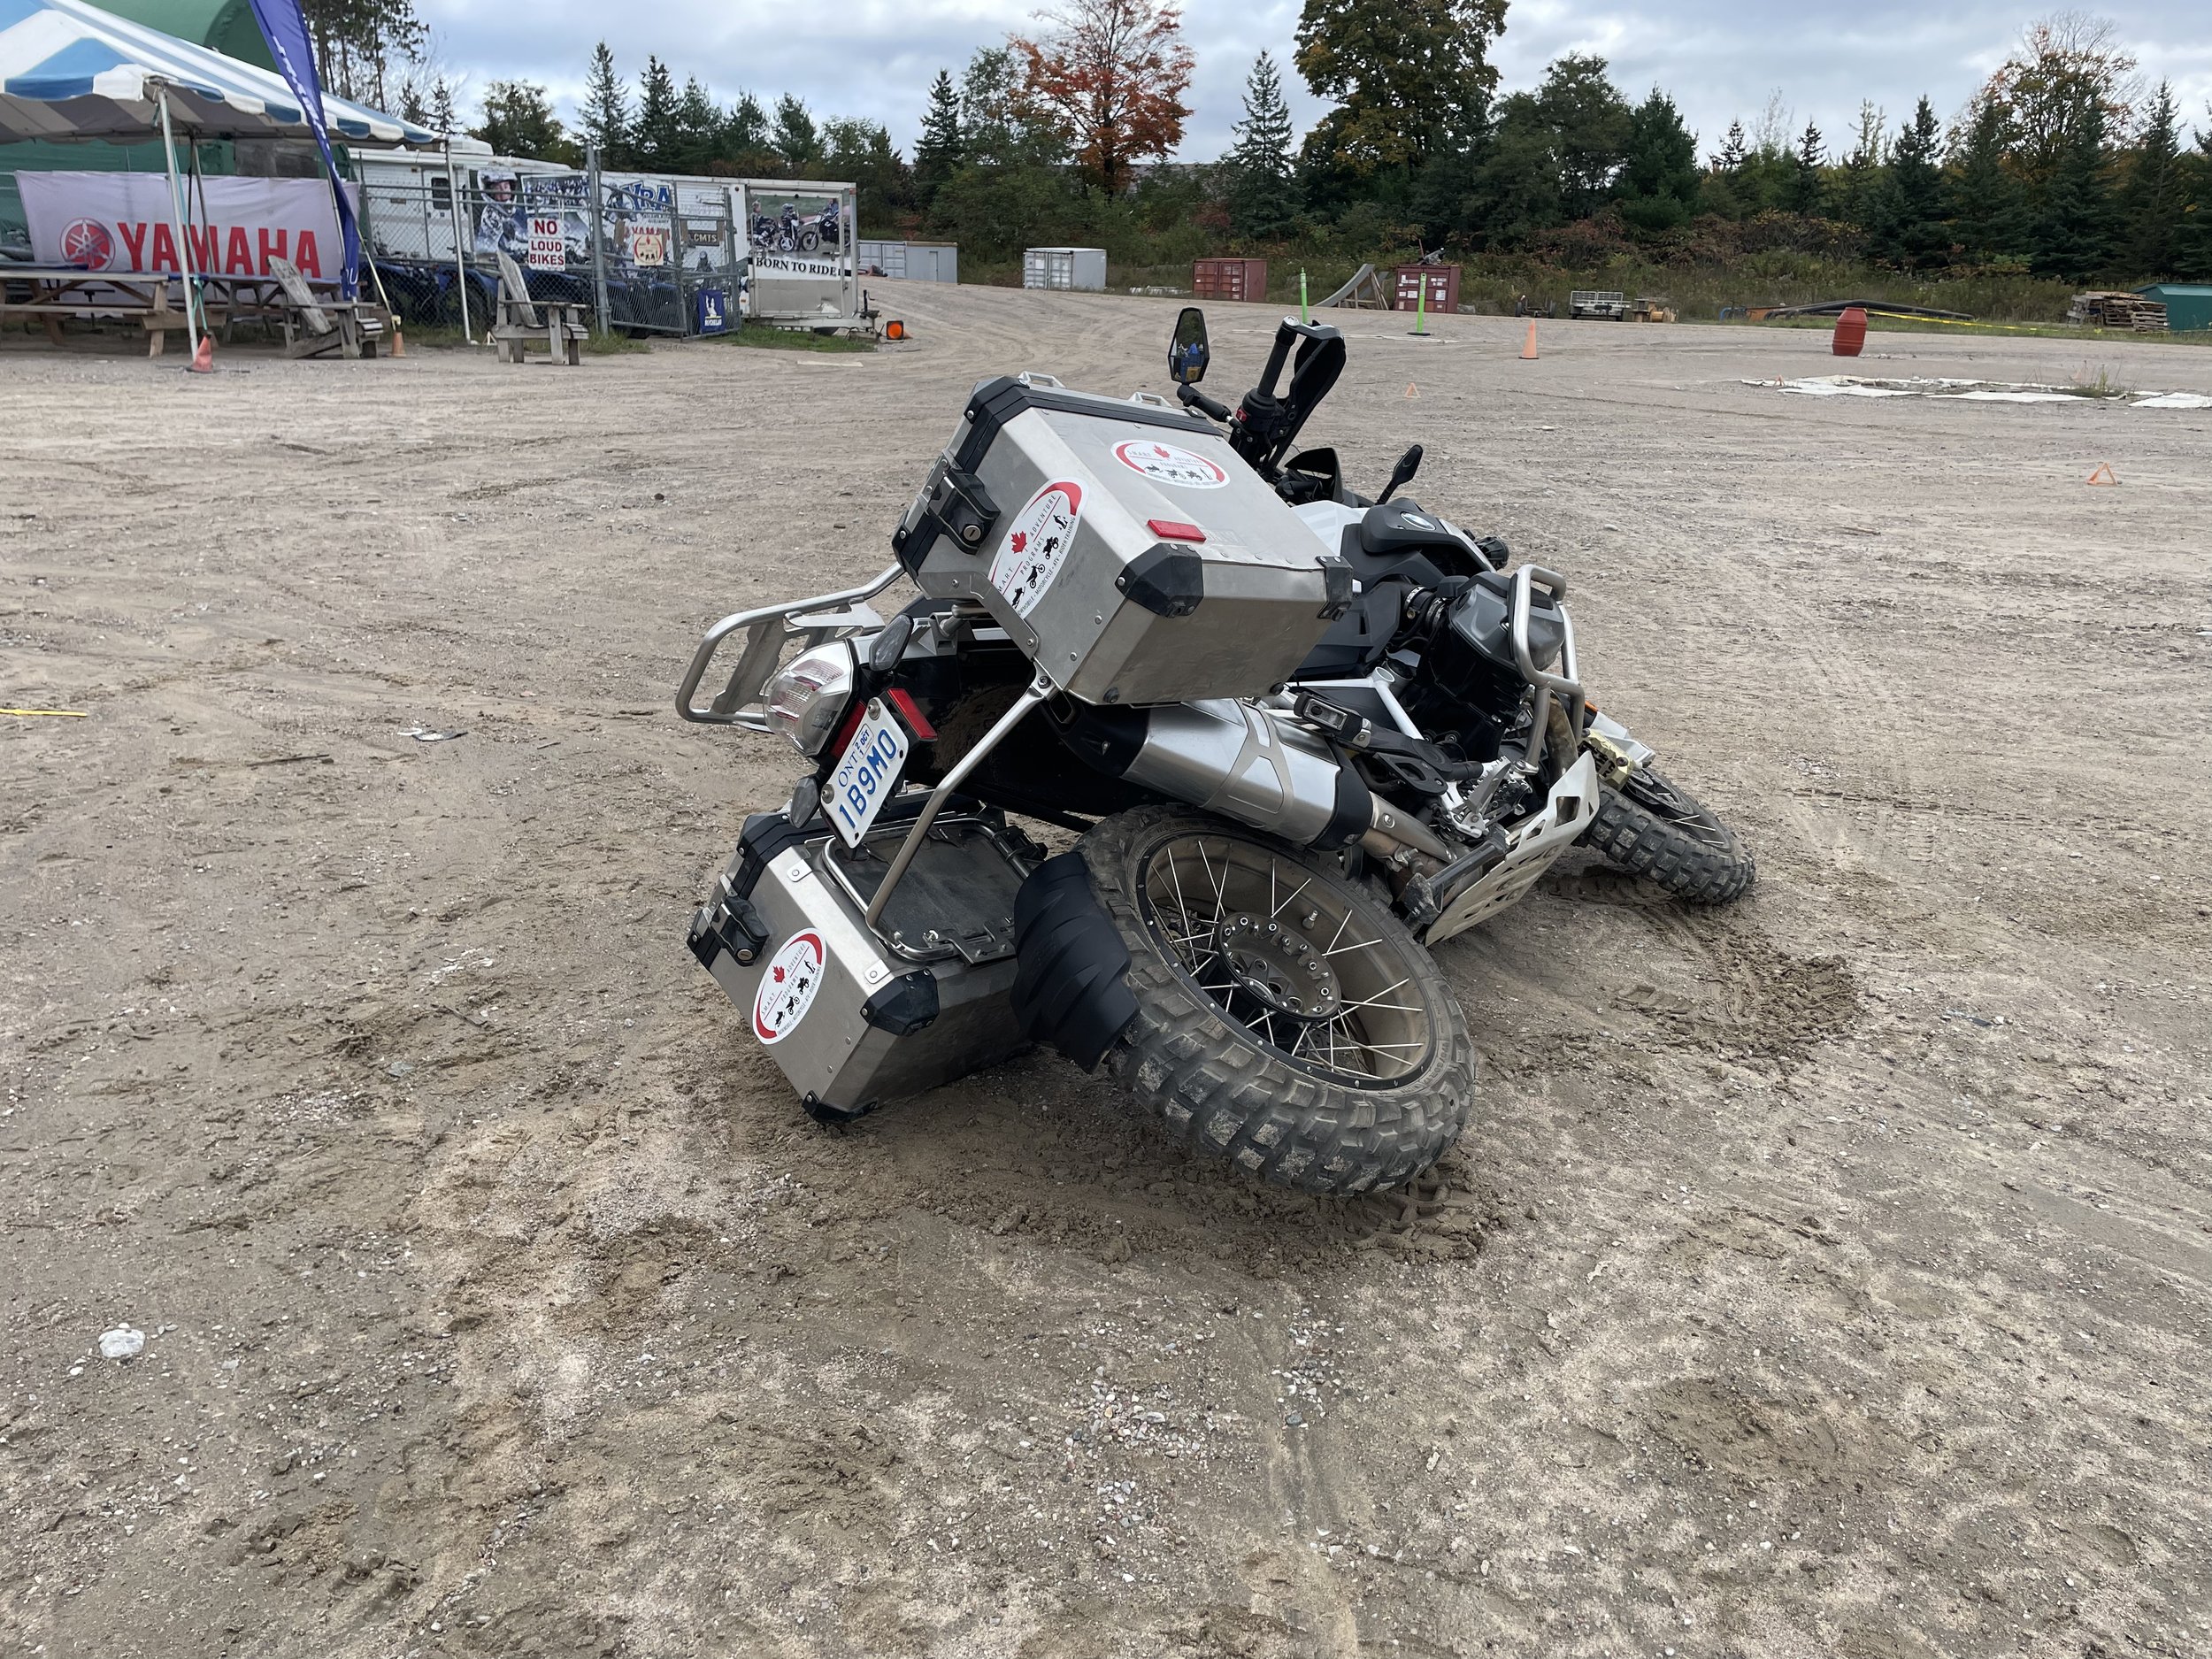  Motorcycle laying on the ground. 